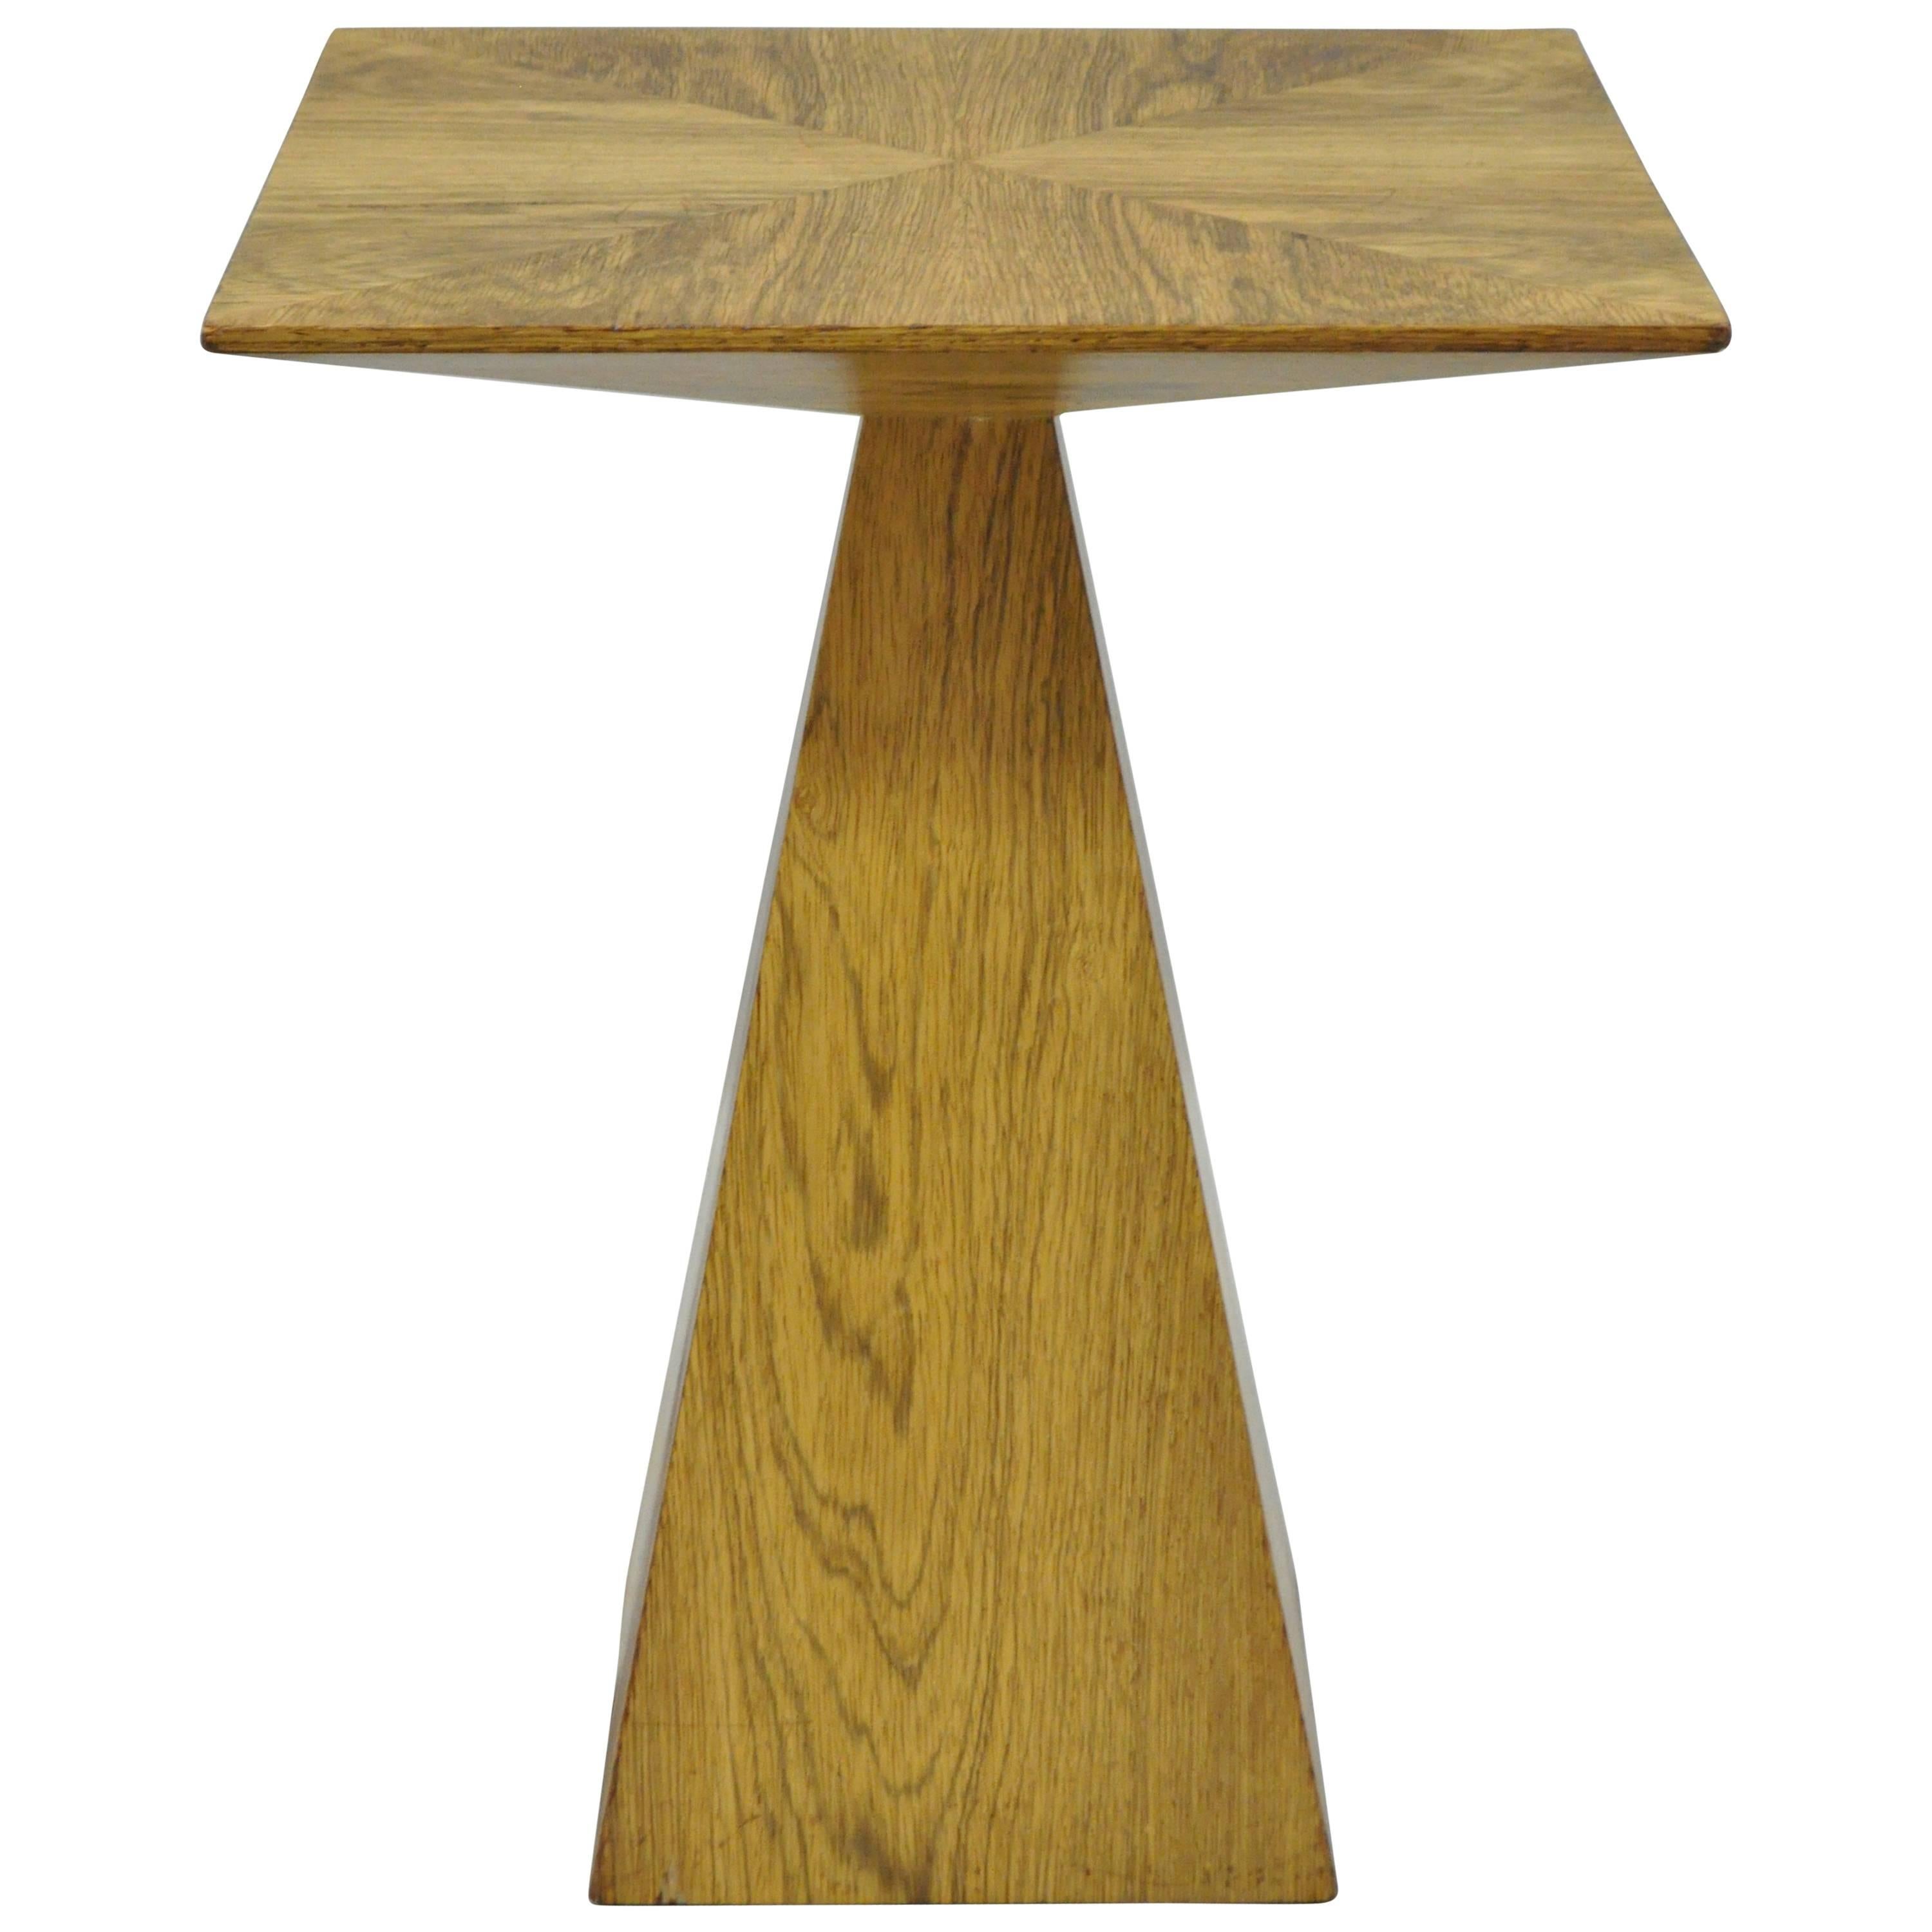 Harvey Probber Mid-Century Modern Wenge Wood Pyramid Occasional Side Table For Sale